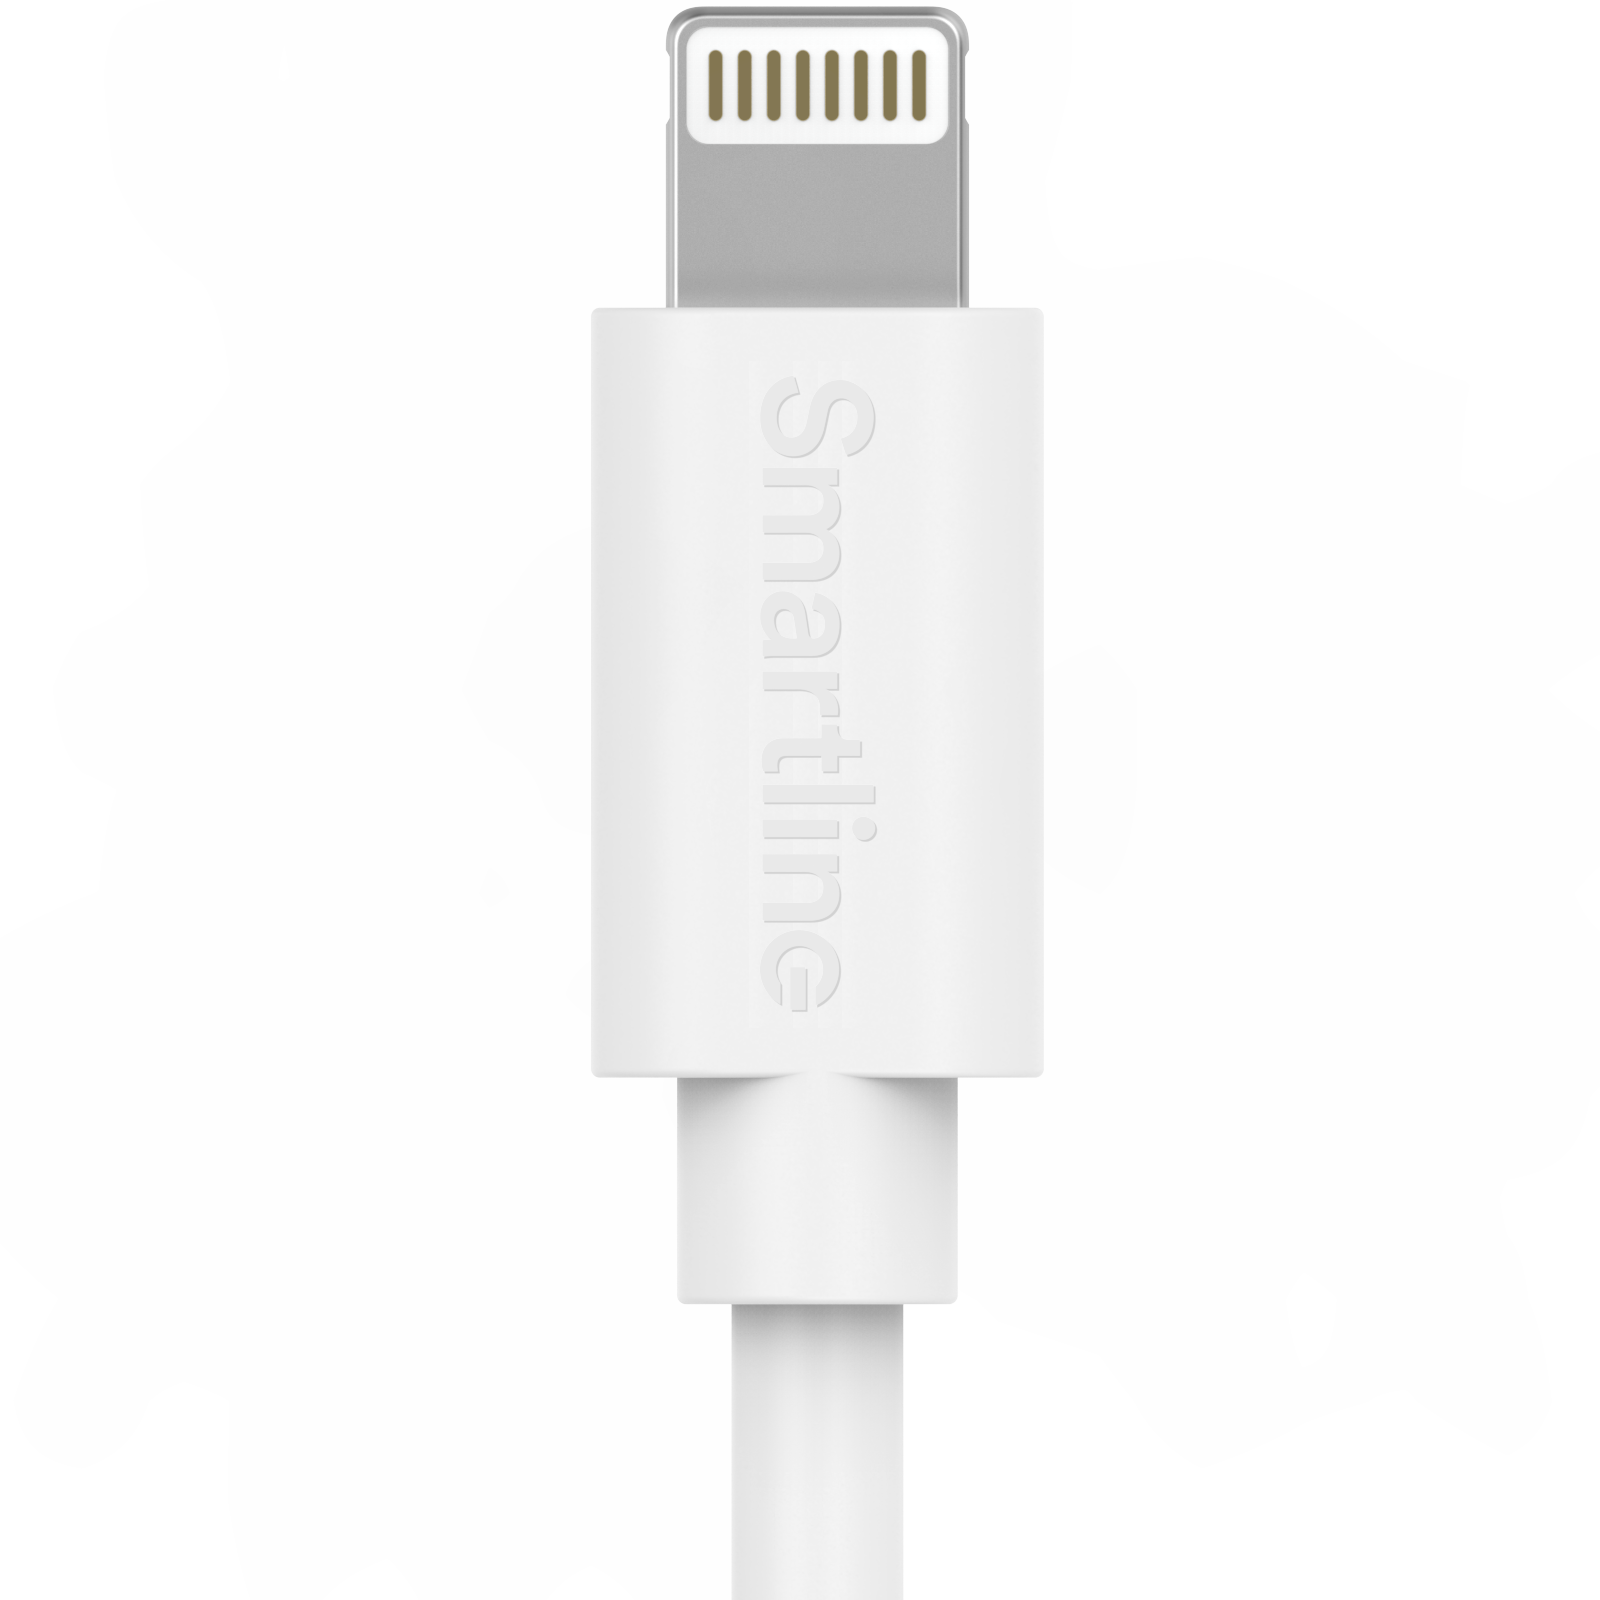 Complete Charger for iPhone 8 - 2m Cable and Wall Charger - Smartline